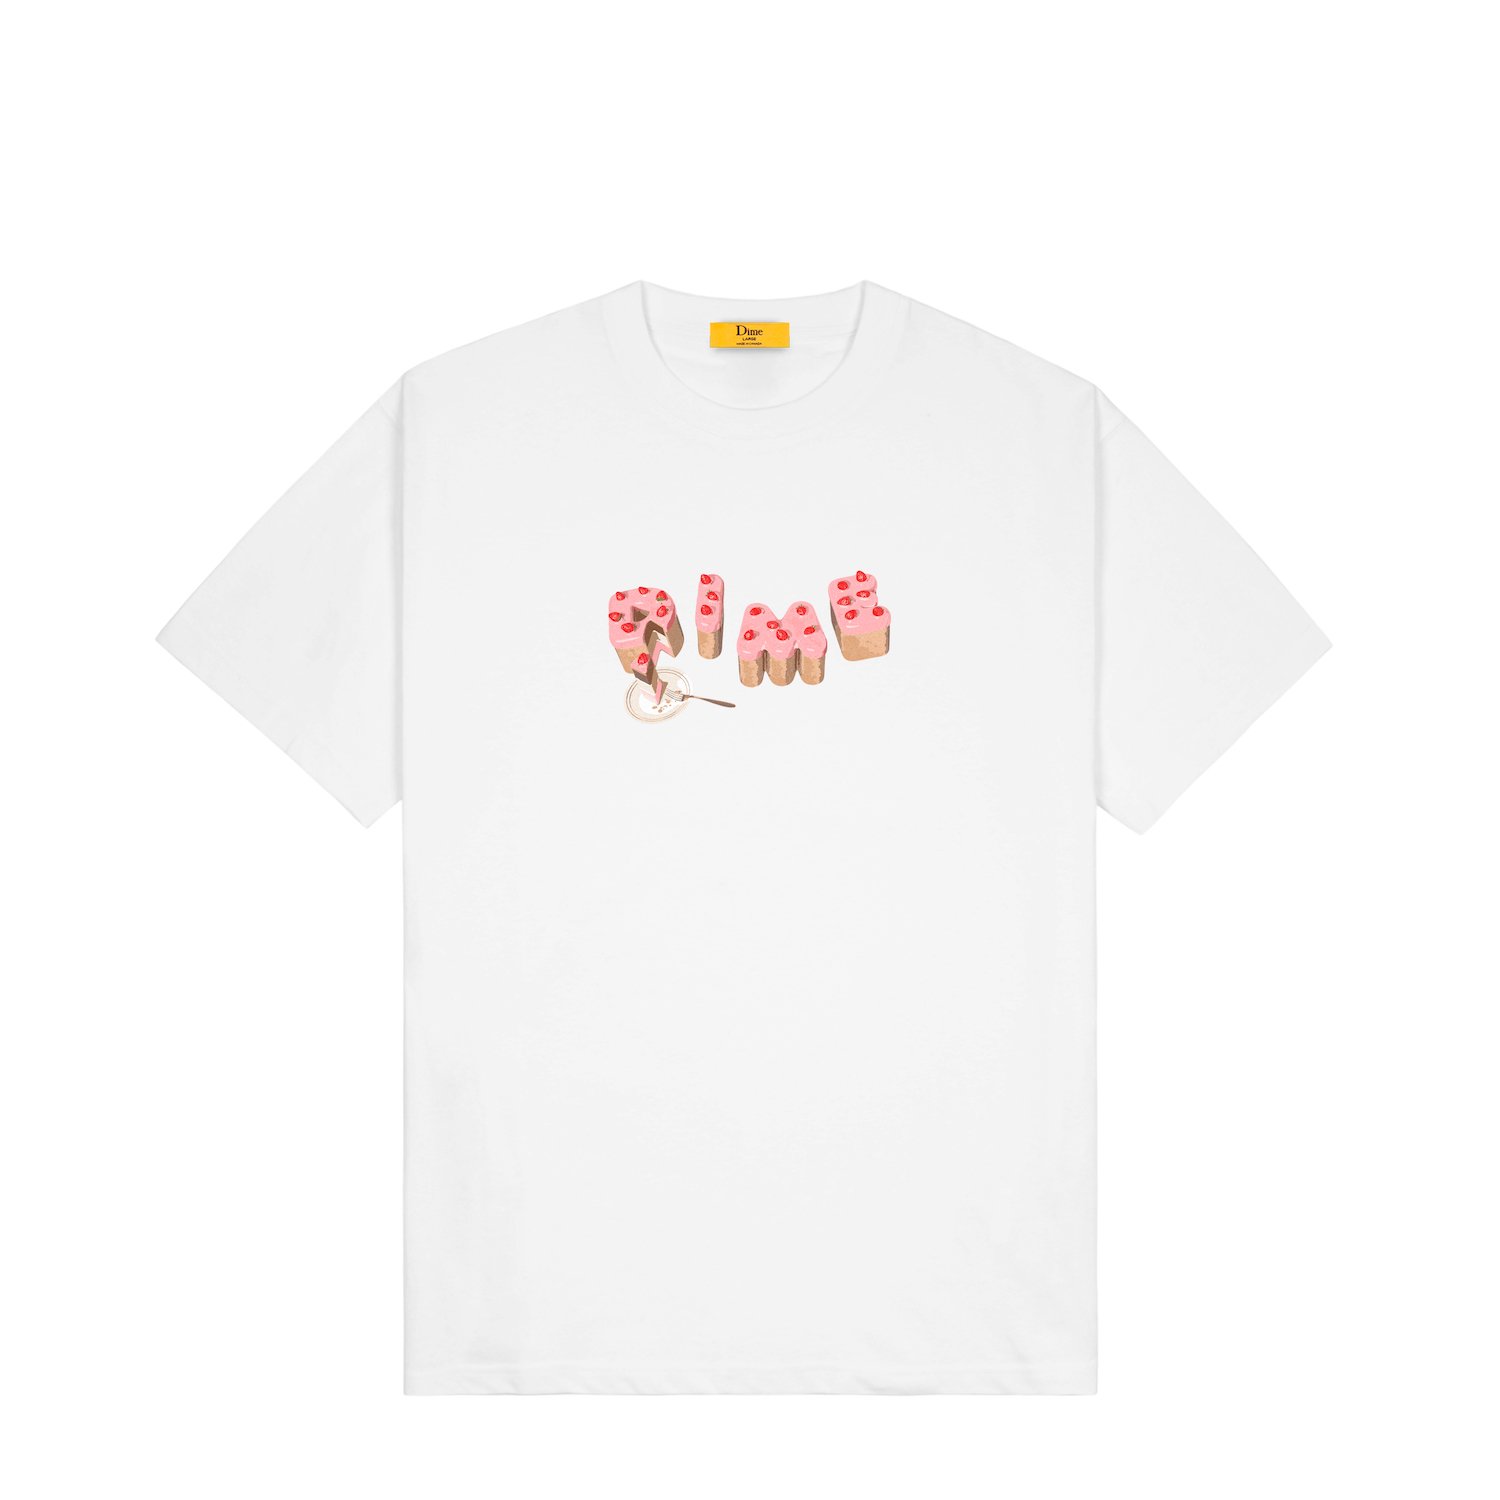 DIME<br>CAKE T-SHIRT<br>